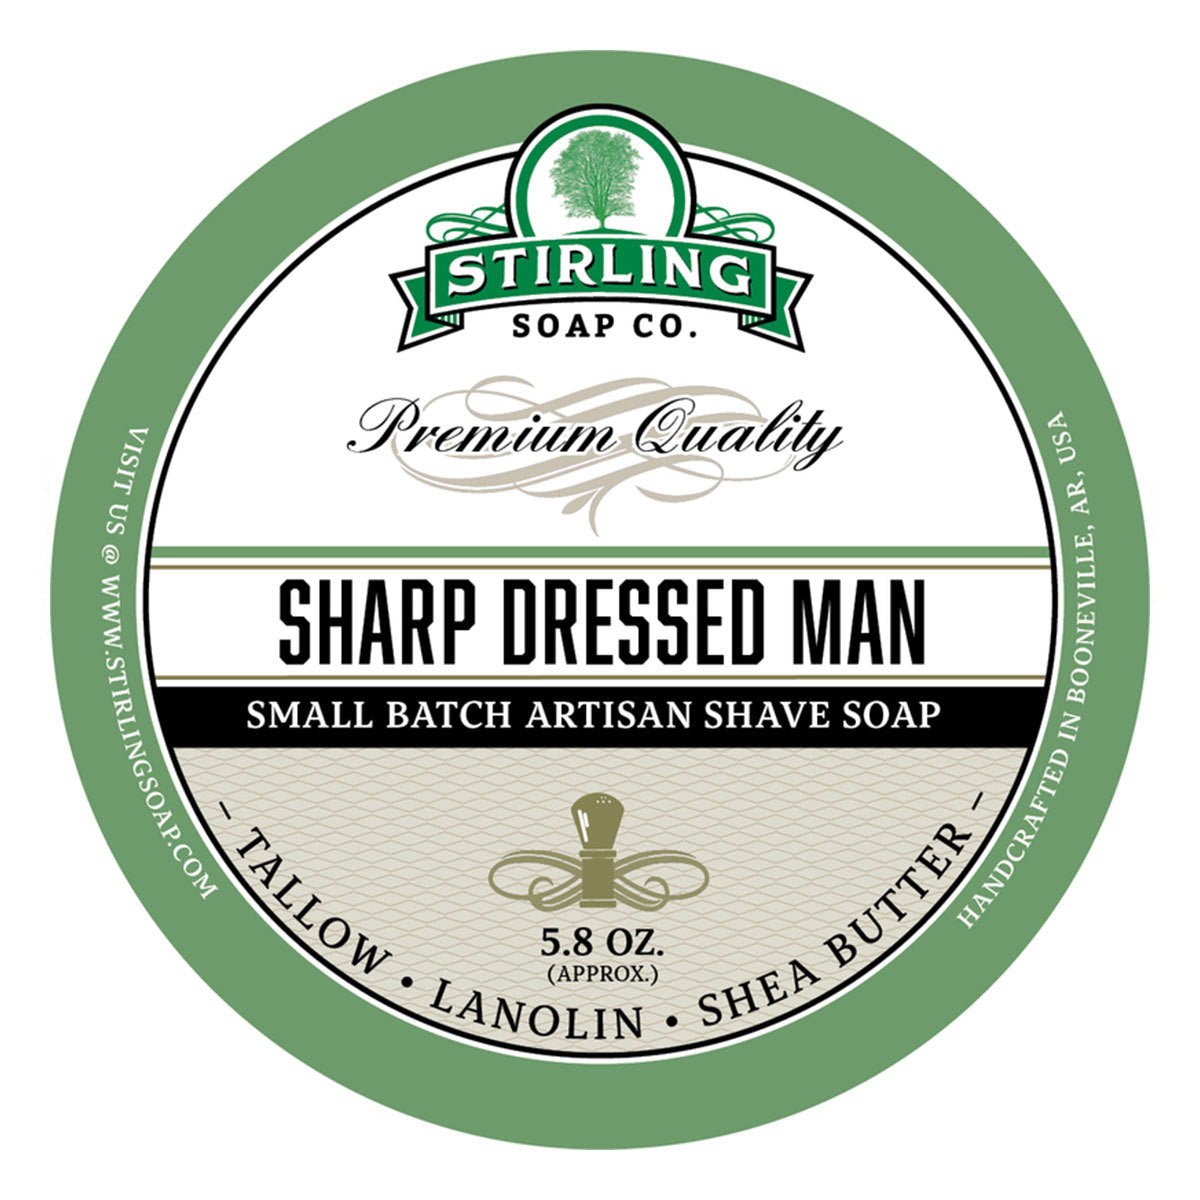 Primary image of Sharp Dressed Man Shave Soap